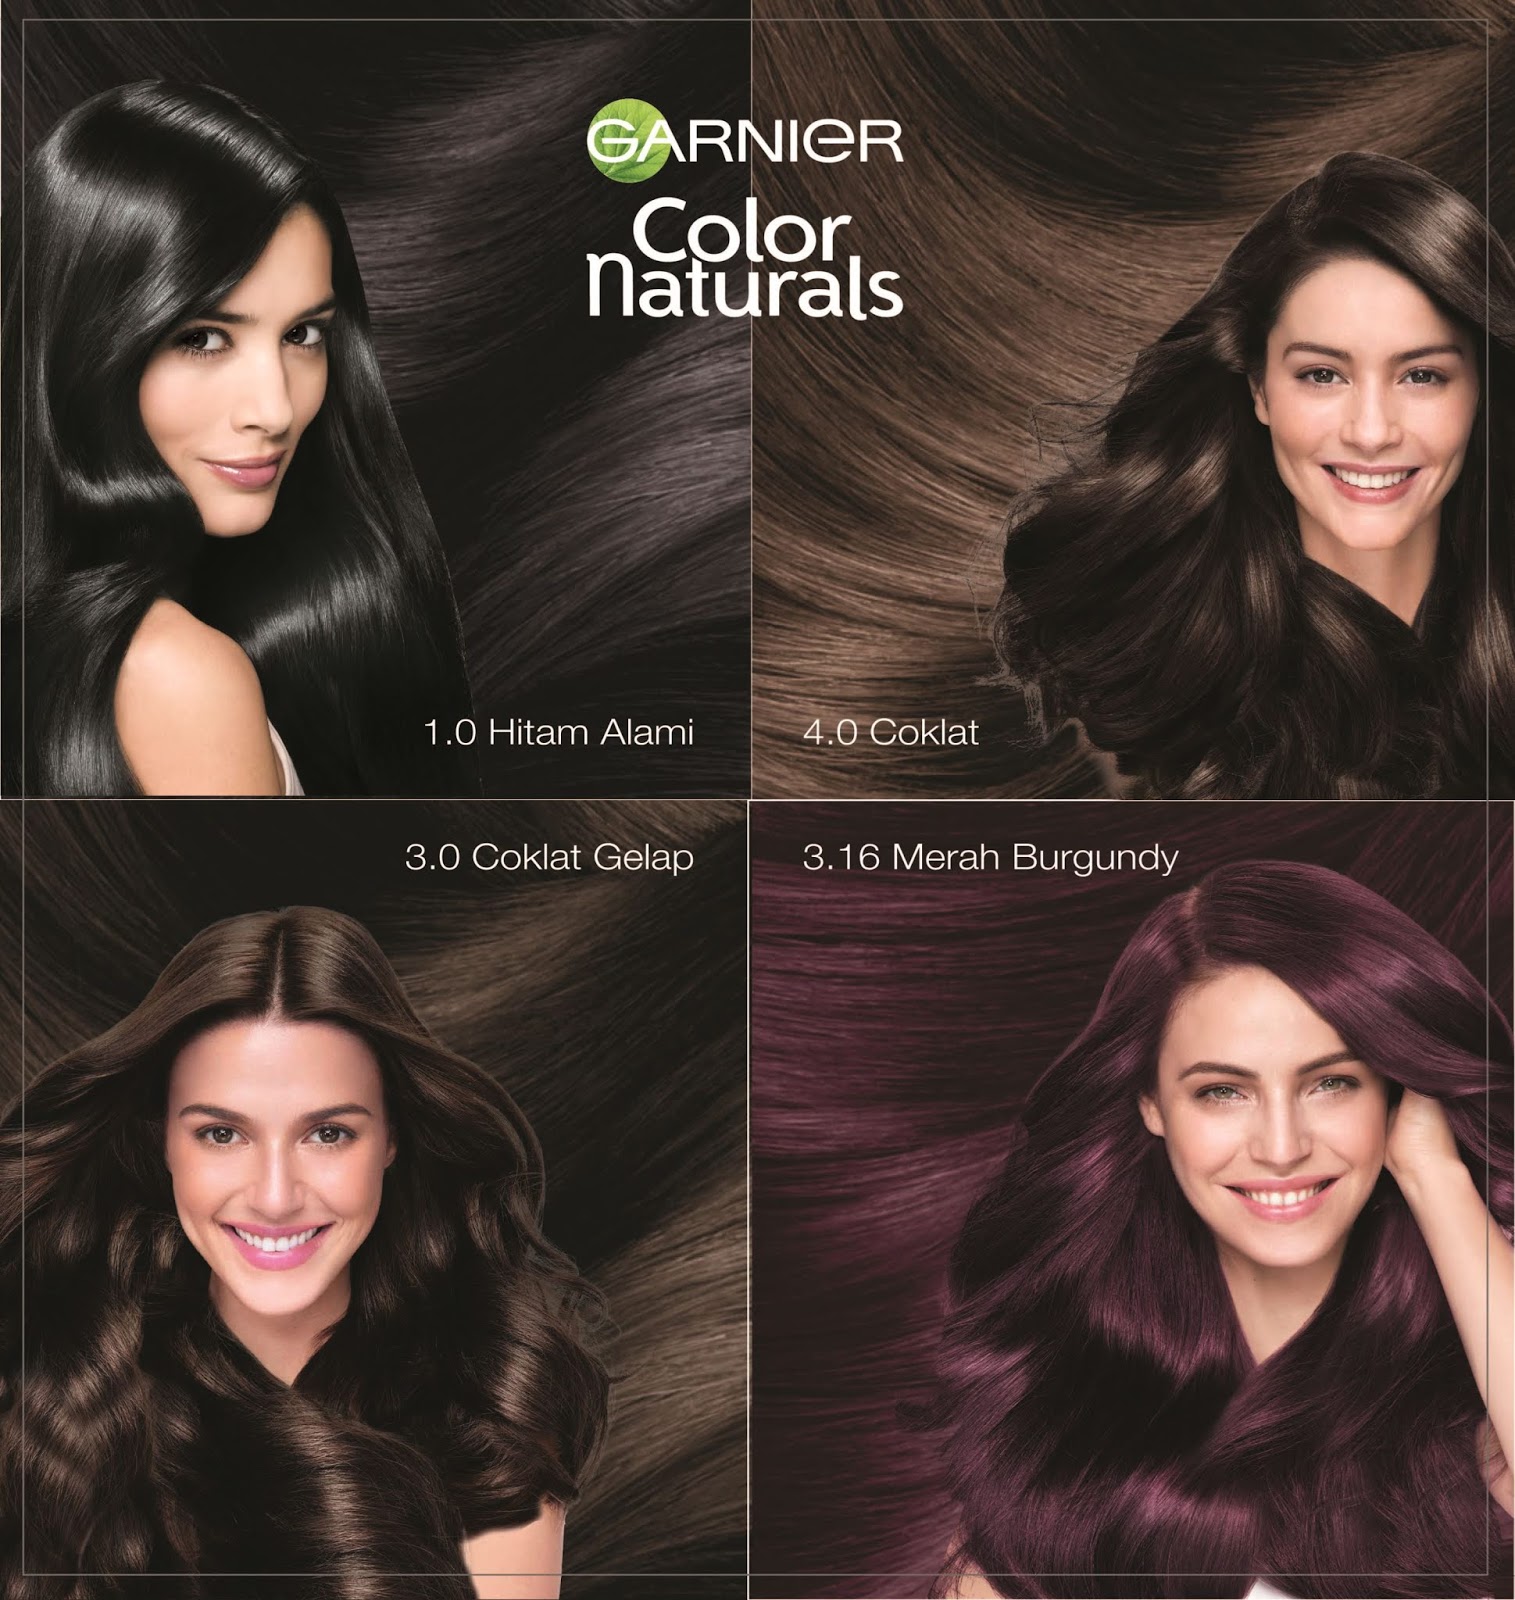 EVERGREEN LOVE: Garnier Color Naturals Introduces New Range of Hair Color